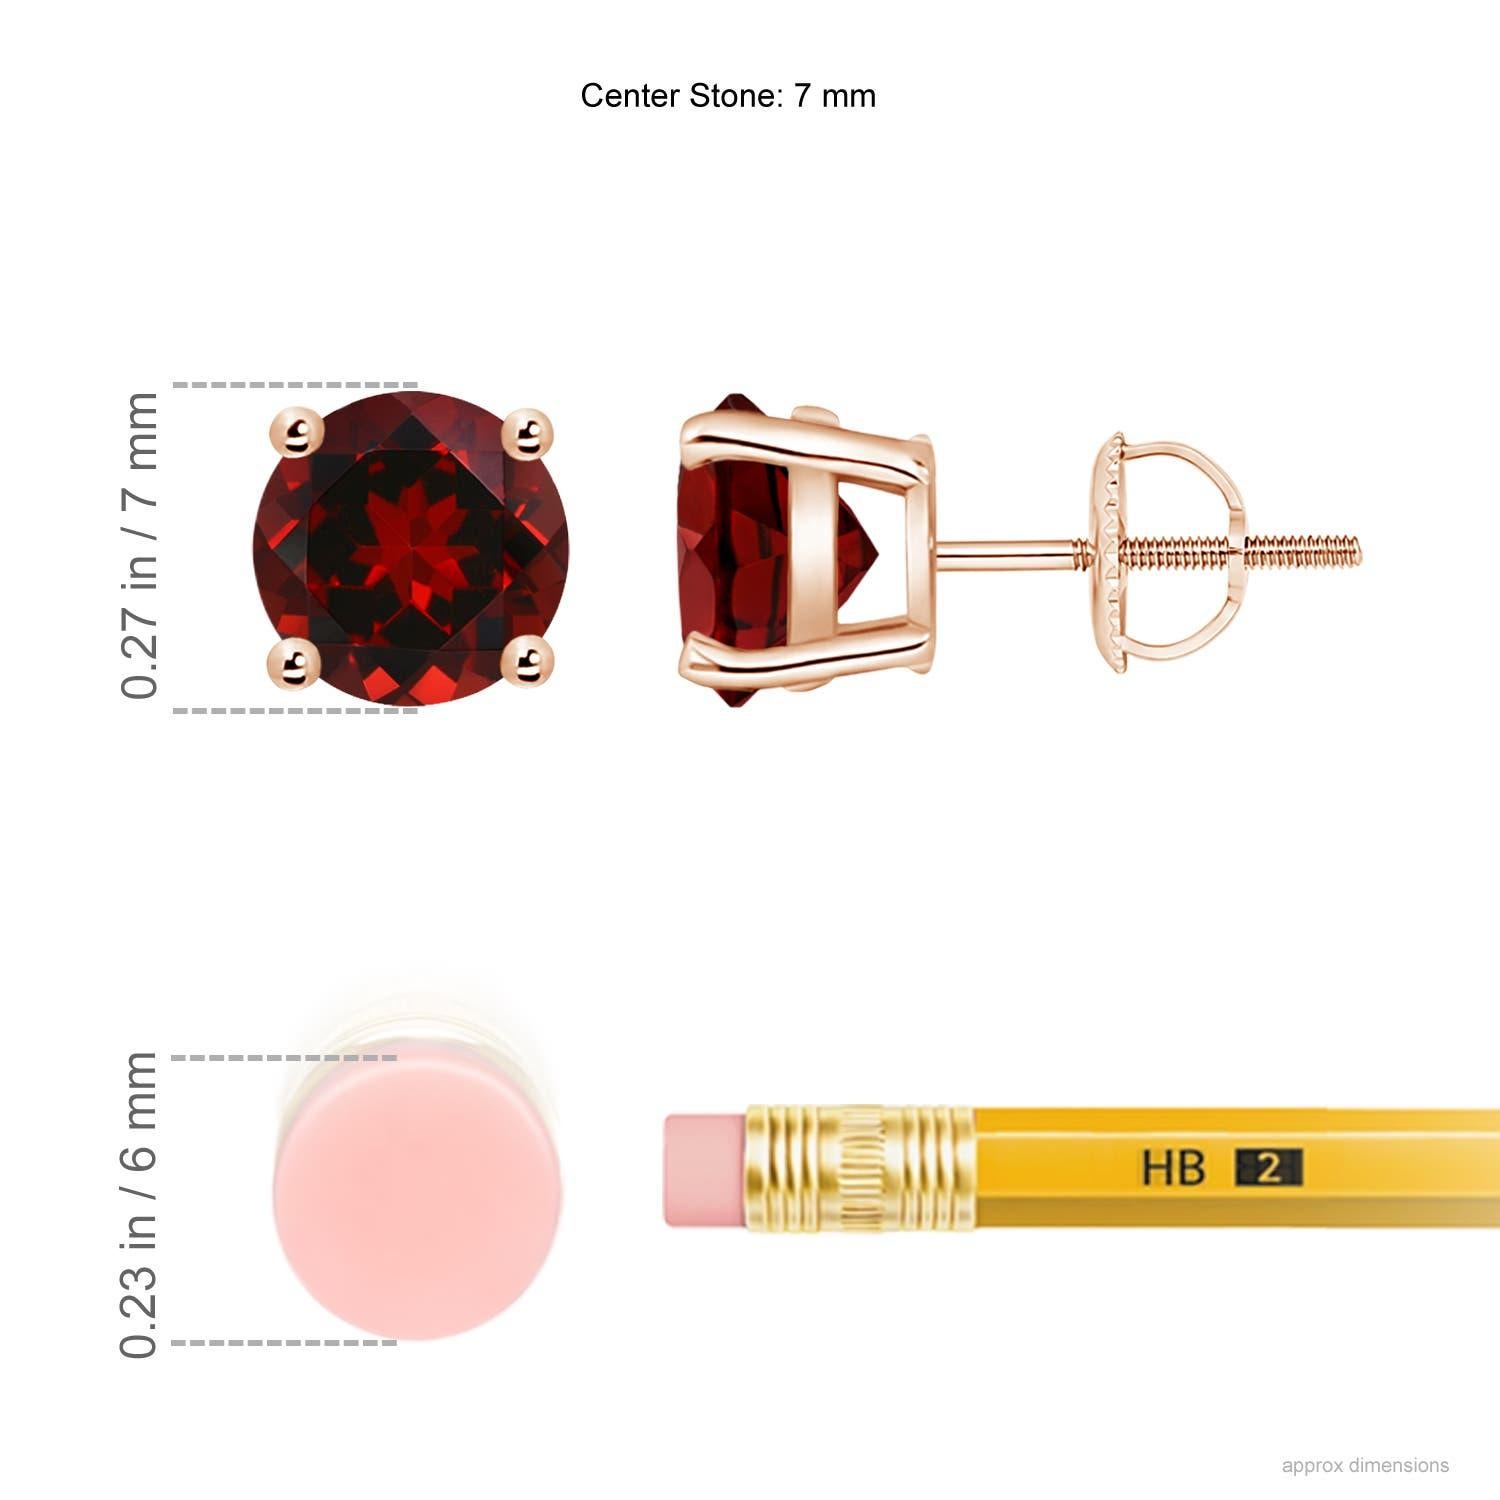 The beauty of these classic garnet stud earrings lies in their simple design and deep red hue. Secured in a 14K rose gold basket prong setting, the round garnets look elegant.